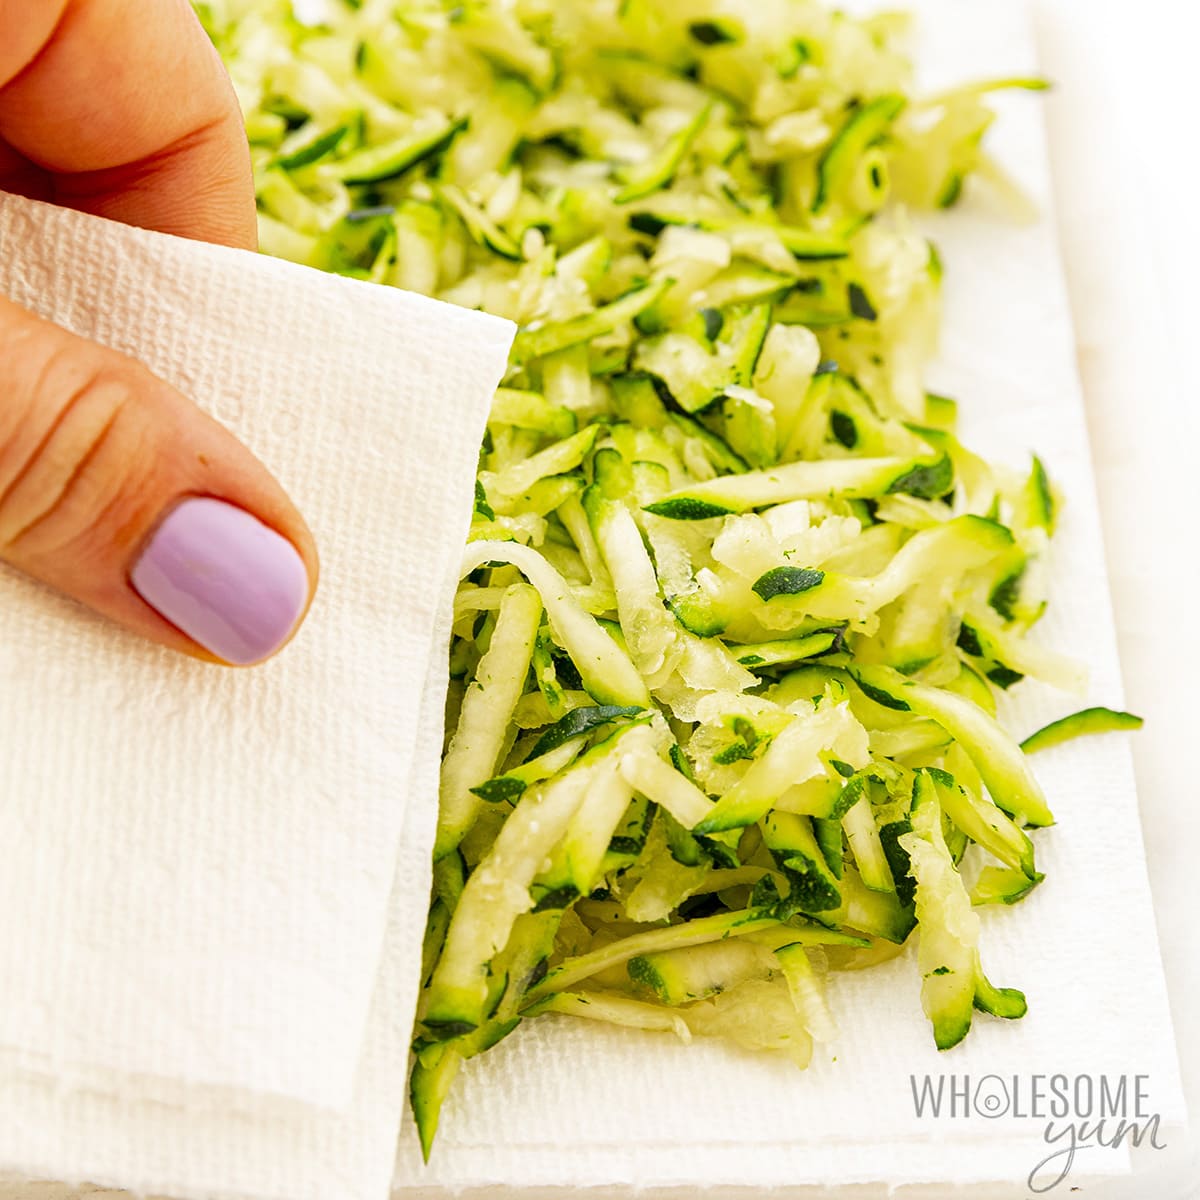 Shredded zucchini patted dry with a paper towel.